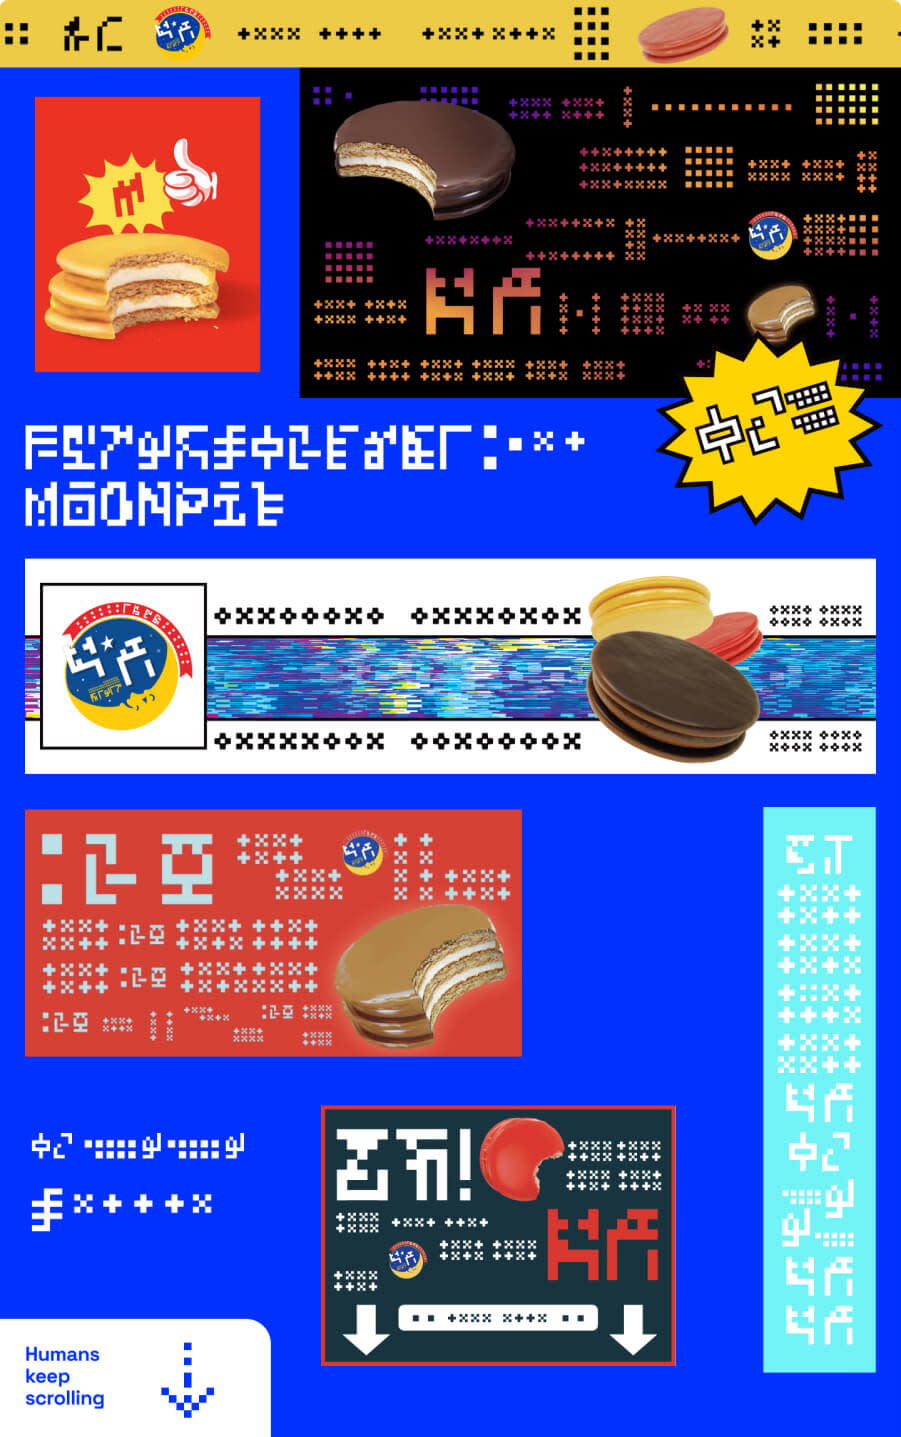 A screenshot of the Alien Acquisition website covered in bright colors and an unreadable language (to humans!)